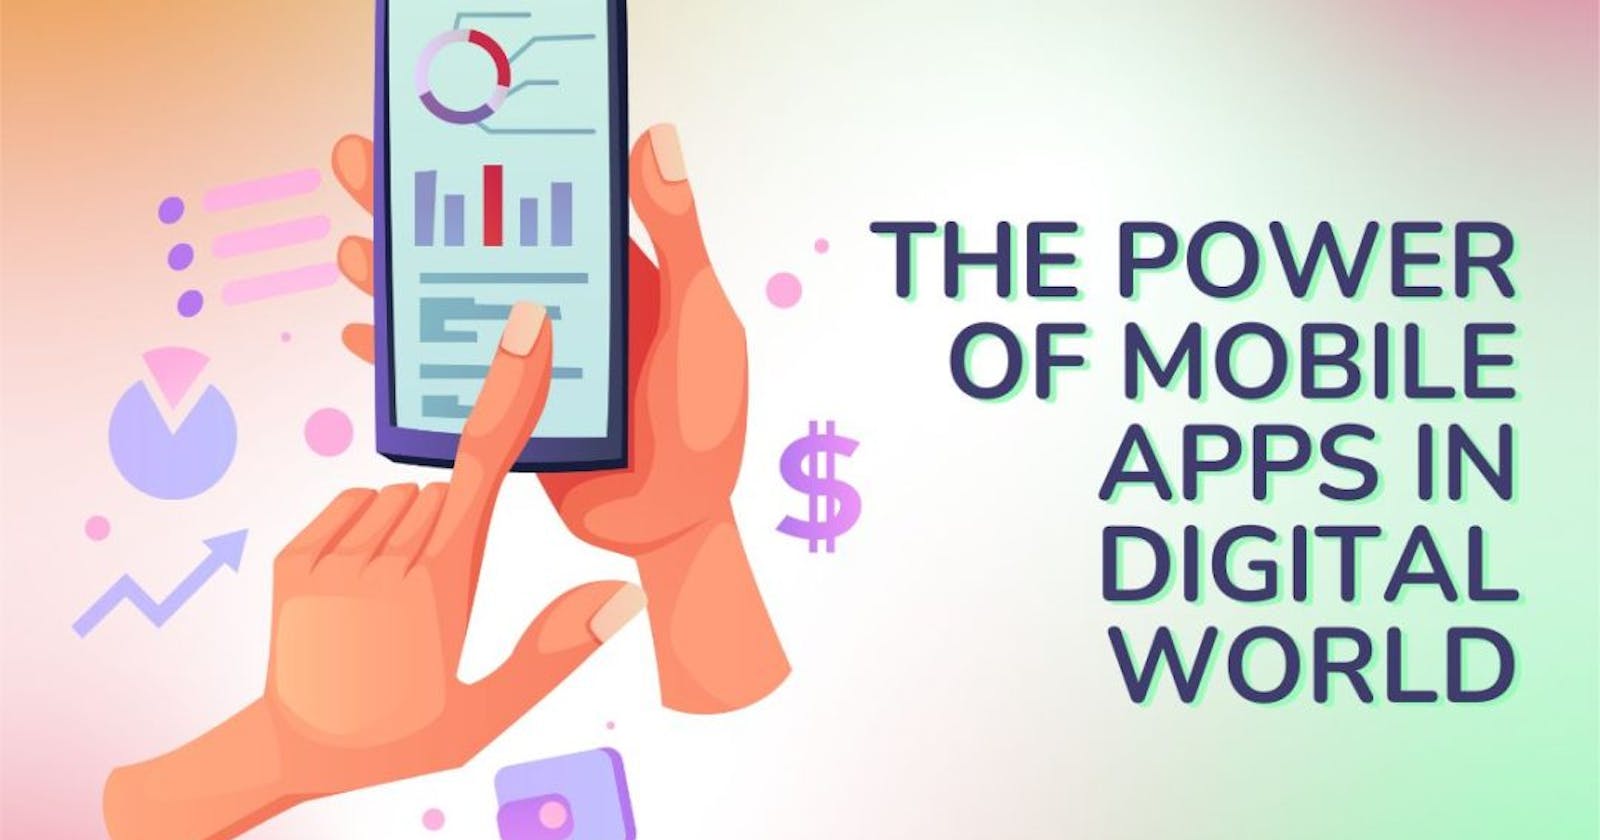 The Power of Mobile Apps in Digital World